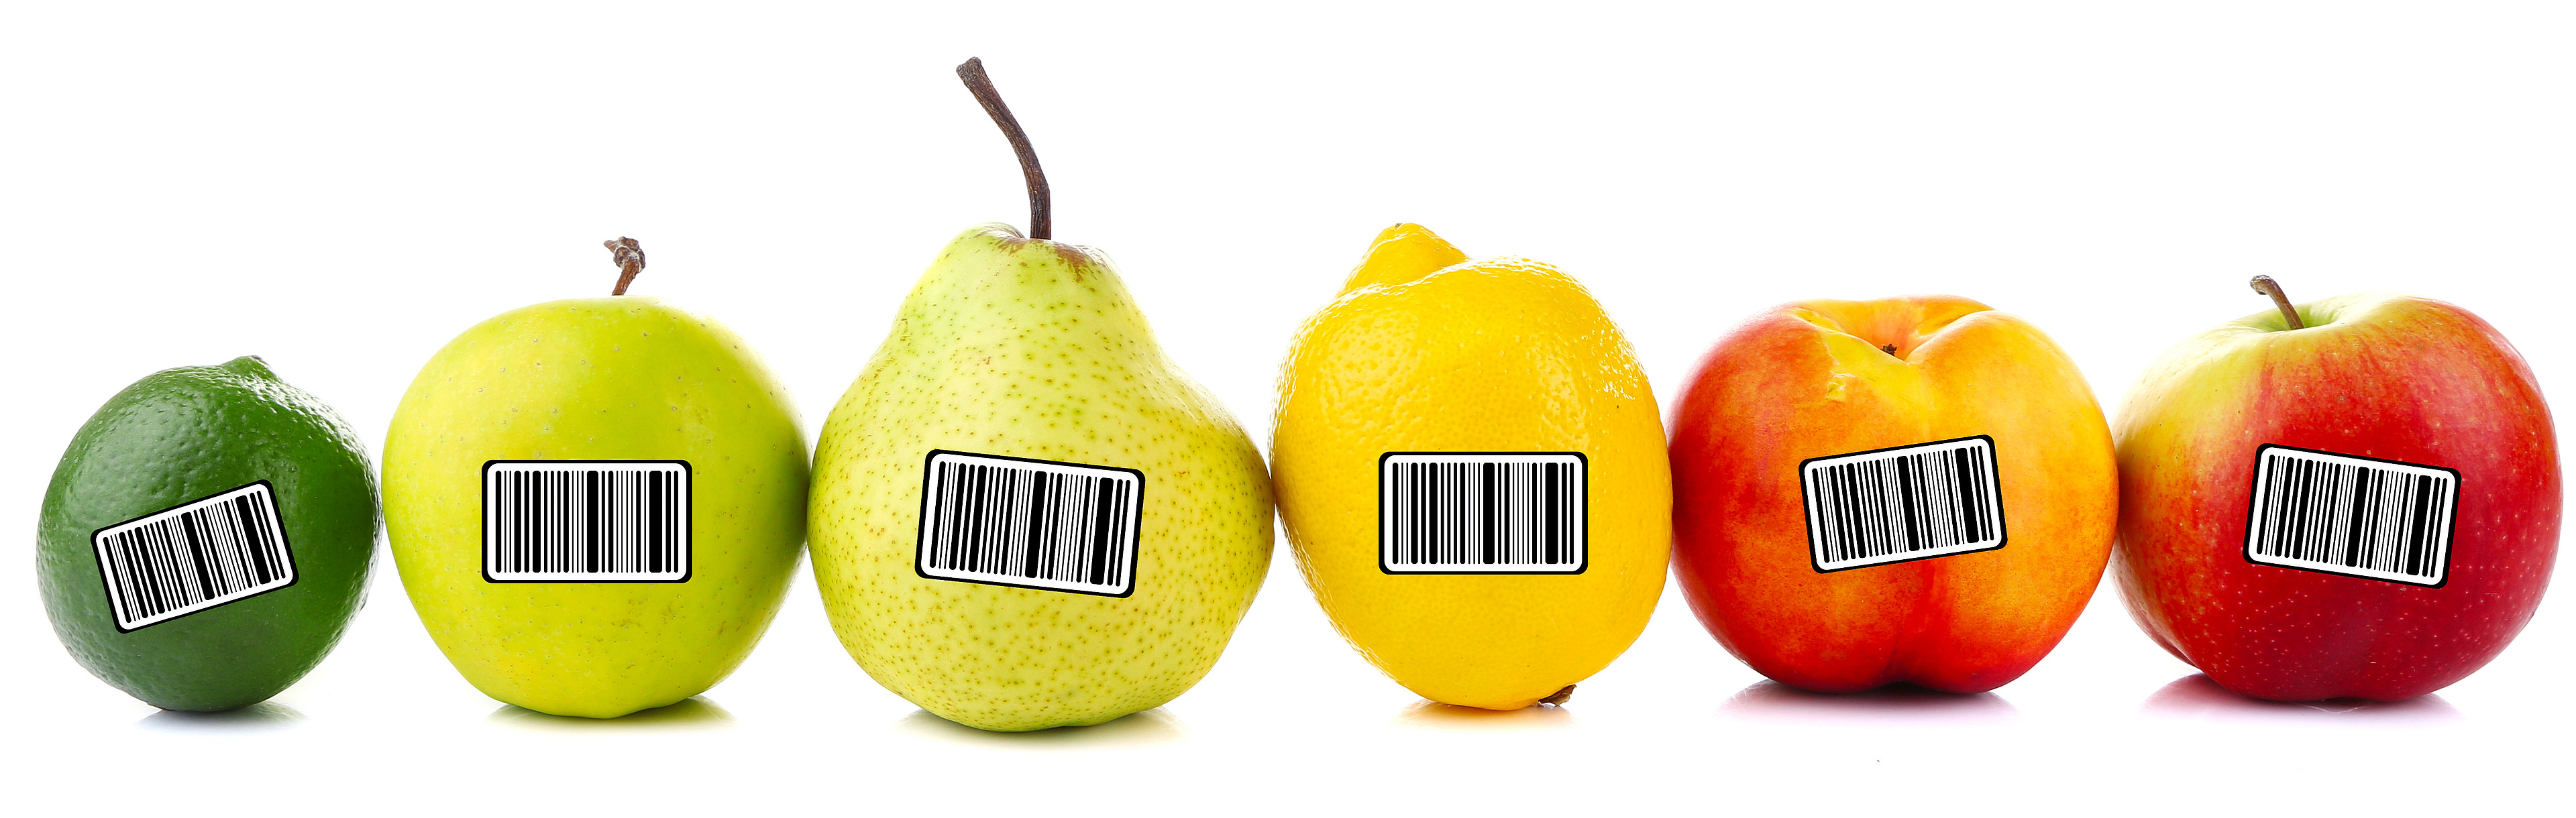 The picture shows a row with different fruits, each with a sticker with a barcode on it.